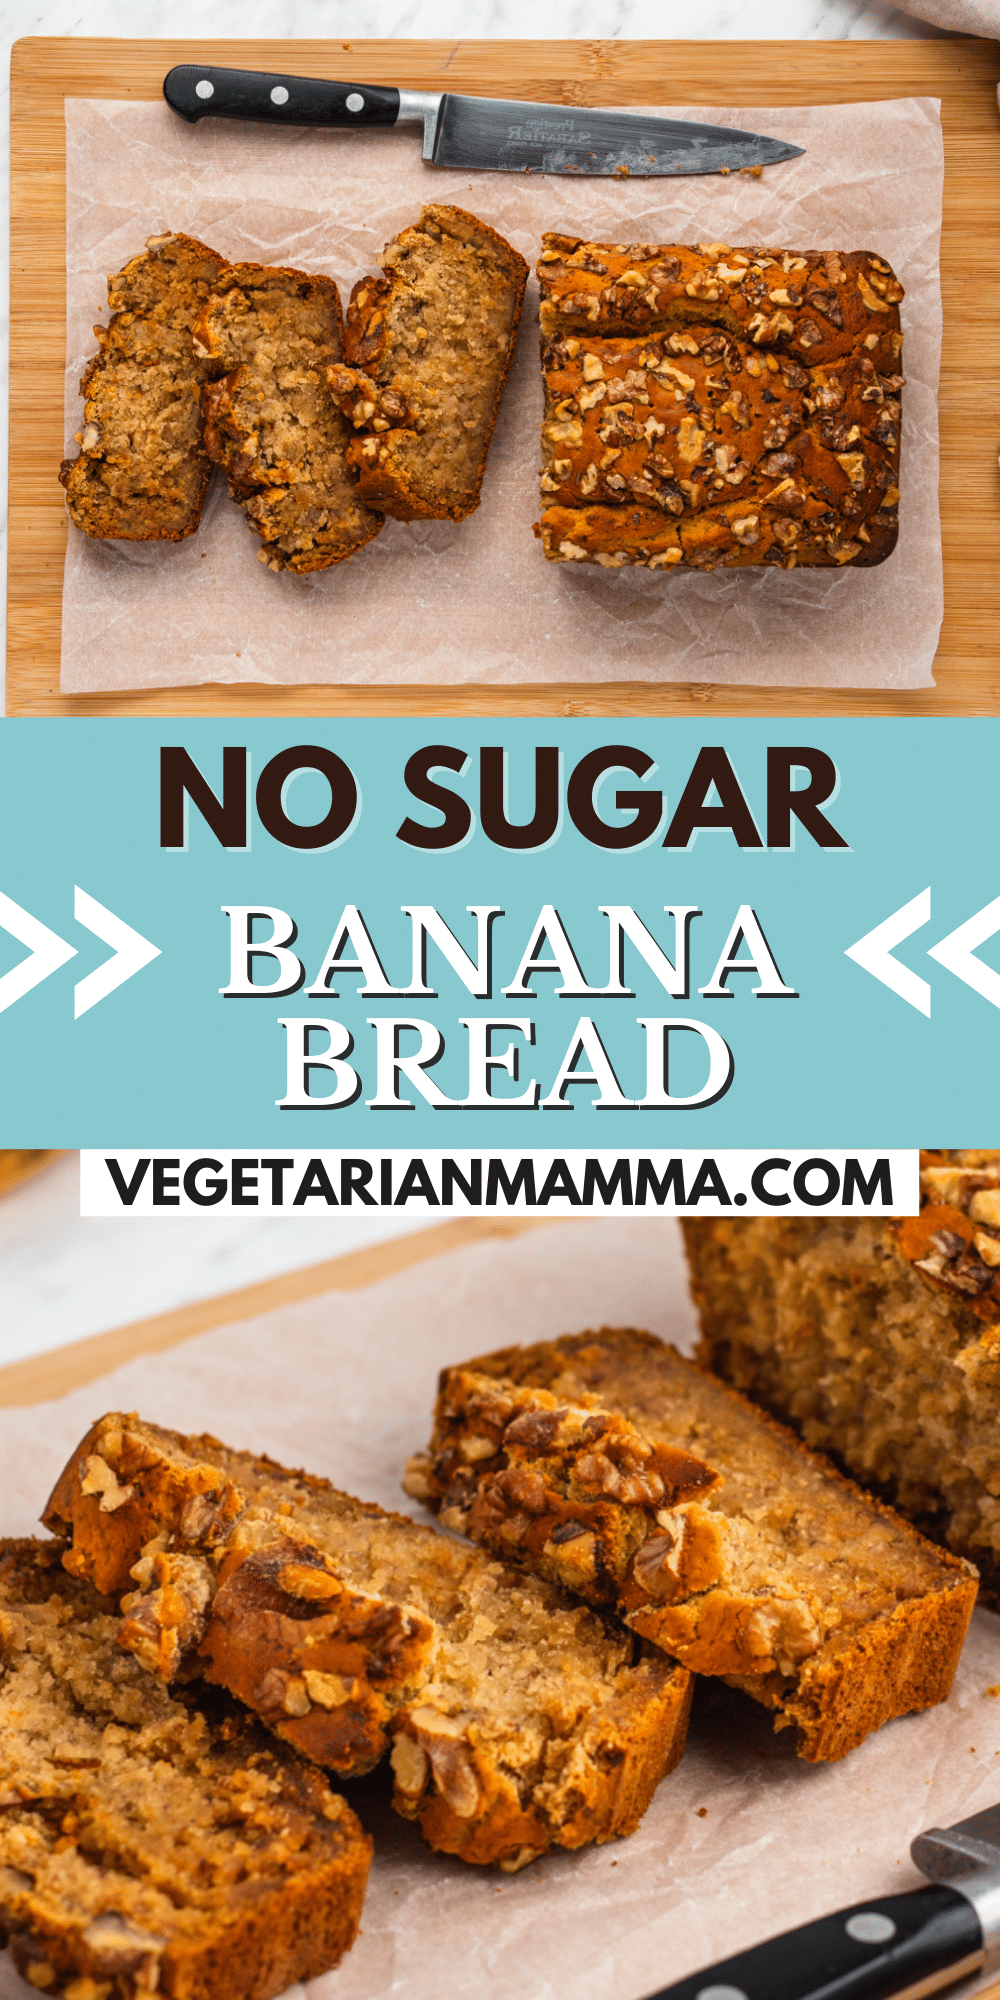 This no sugar banana bread is so moist and naturally sweet! Start your day right with a fluffy slice of gluten-free banana bread topped with crunchy walnuts.